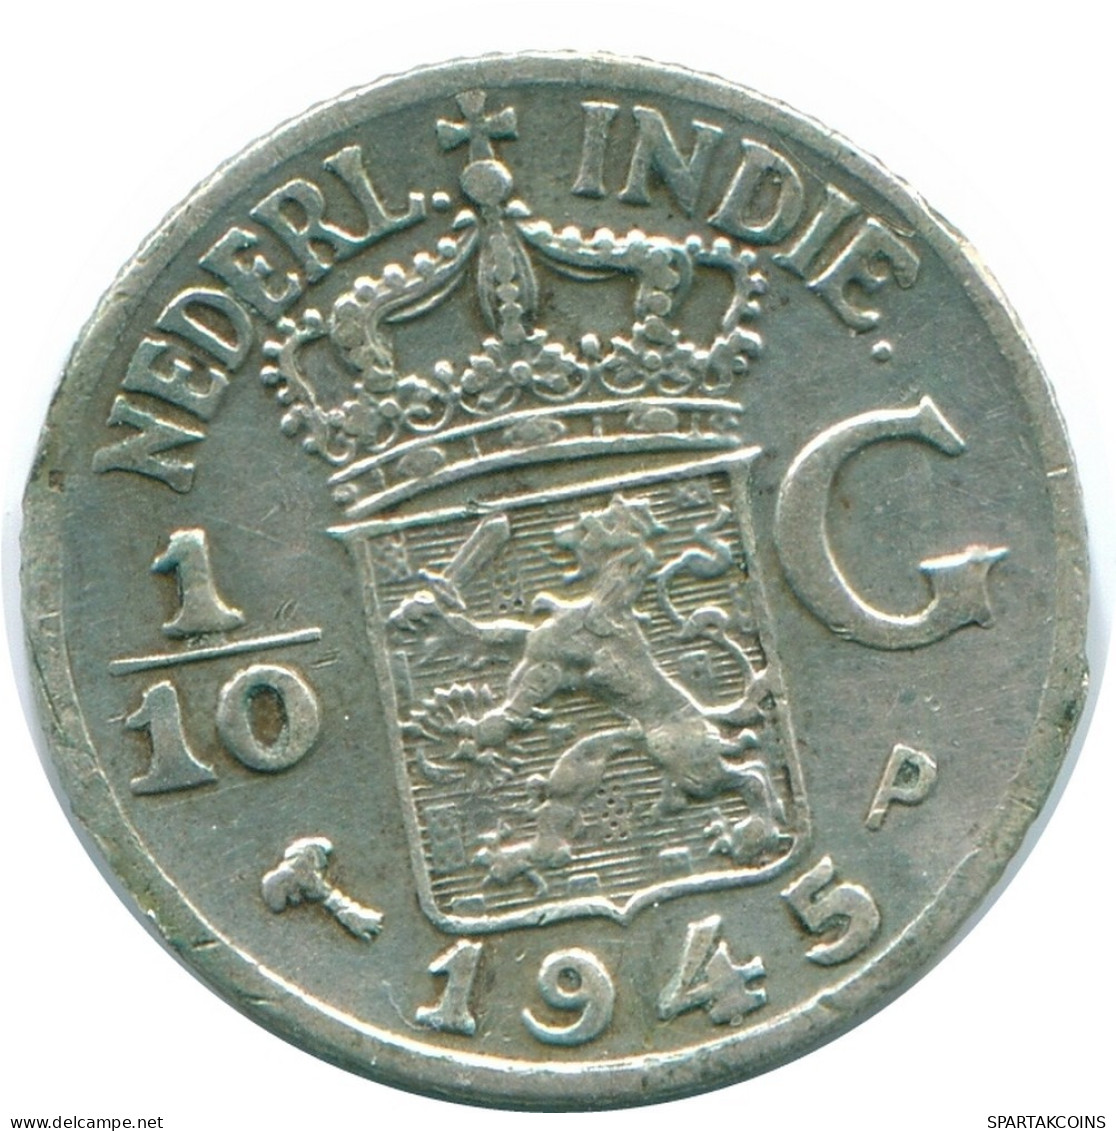 1/10 GULDEN 1945 P NETHERLANDS EAST INDIES SILVER Colonial Coin #NL14115.3.U.A - Dutch East Indies